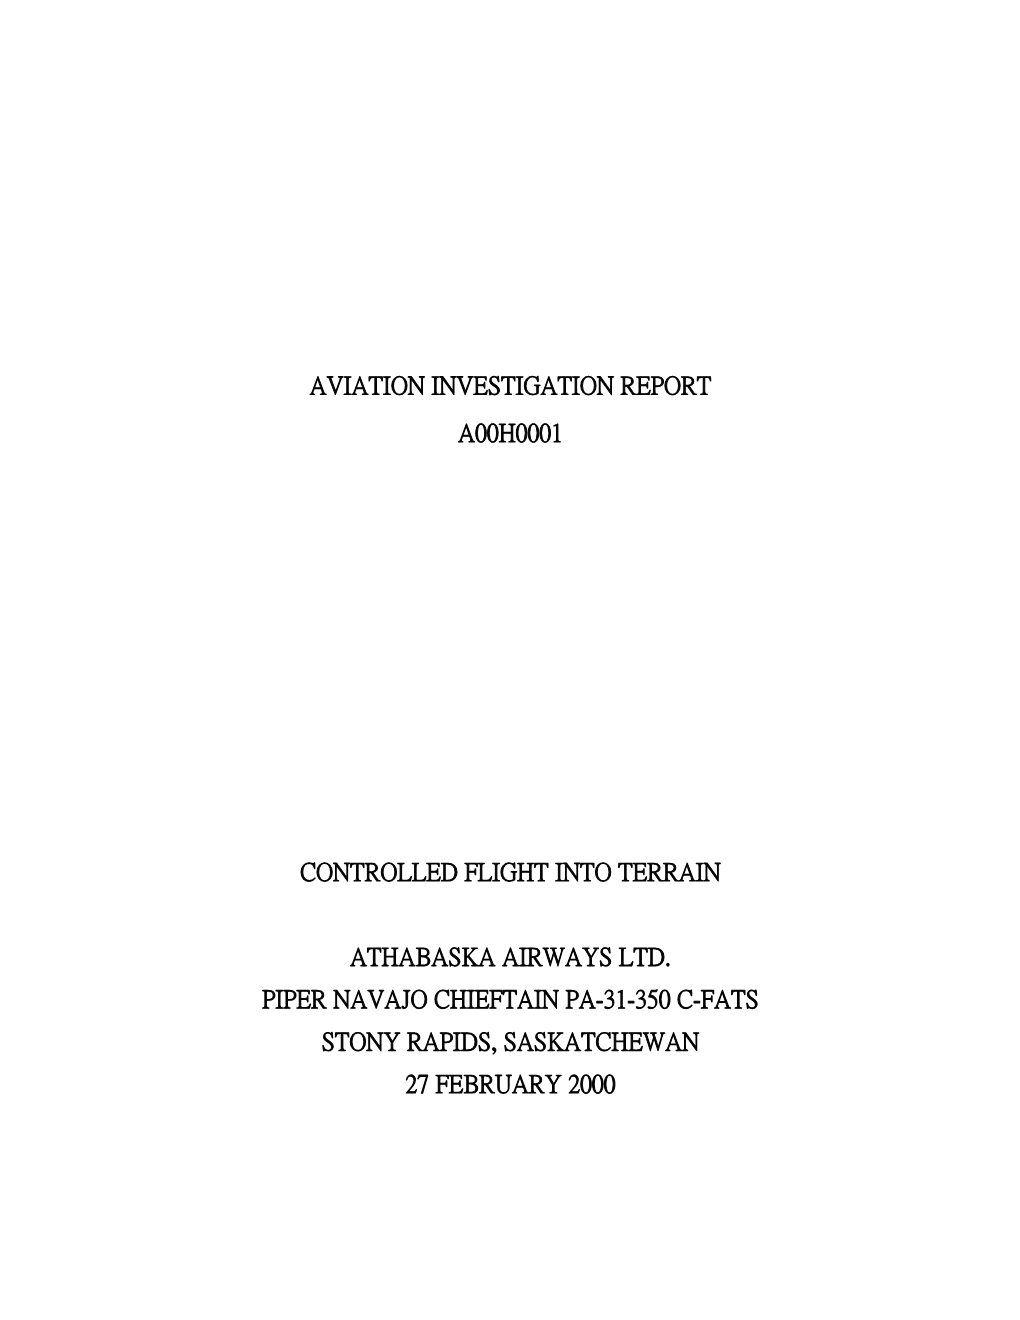 Aviation Investigation Report A00h0001 Controlled Flight